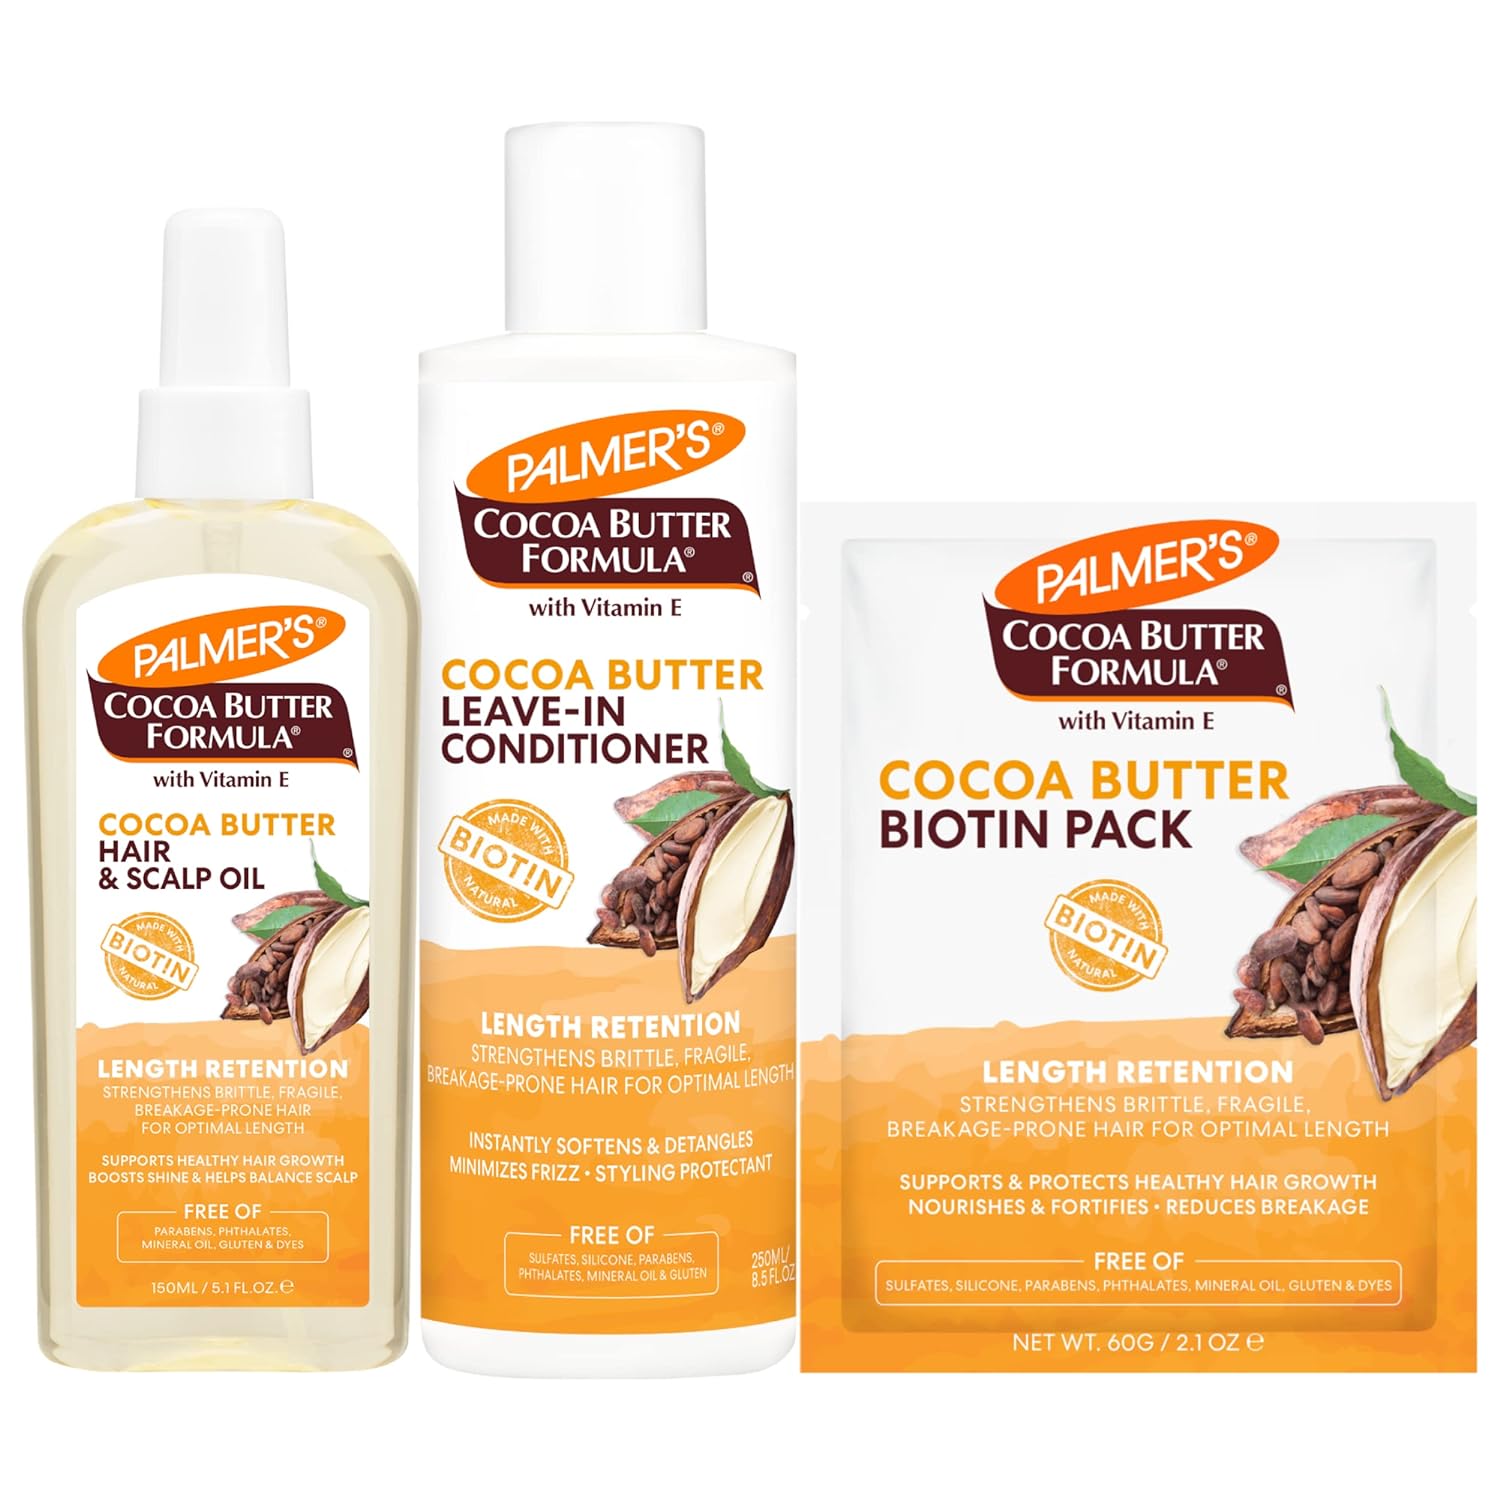 Palmer's Hair & Scalp Oil + Leave In Conditioner + Hair Biotin Pack, Cocoa Butter Hair Care Bundle, Includes 1 Hair & Scalp Oil Spray (5.1 fl oz), 1 Conditioner (8.5 fl oz), 1 Packette (2.1 oz)